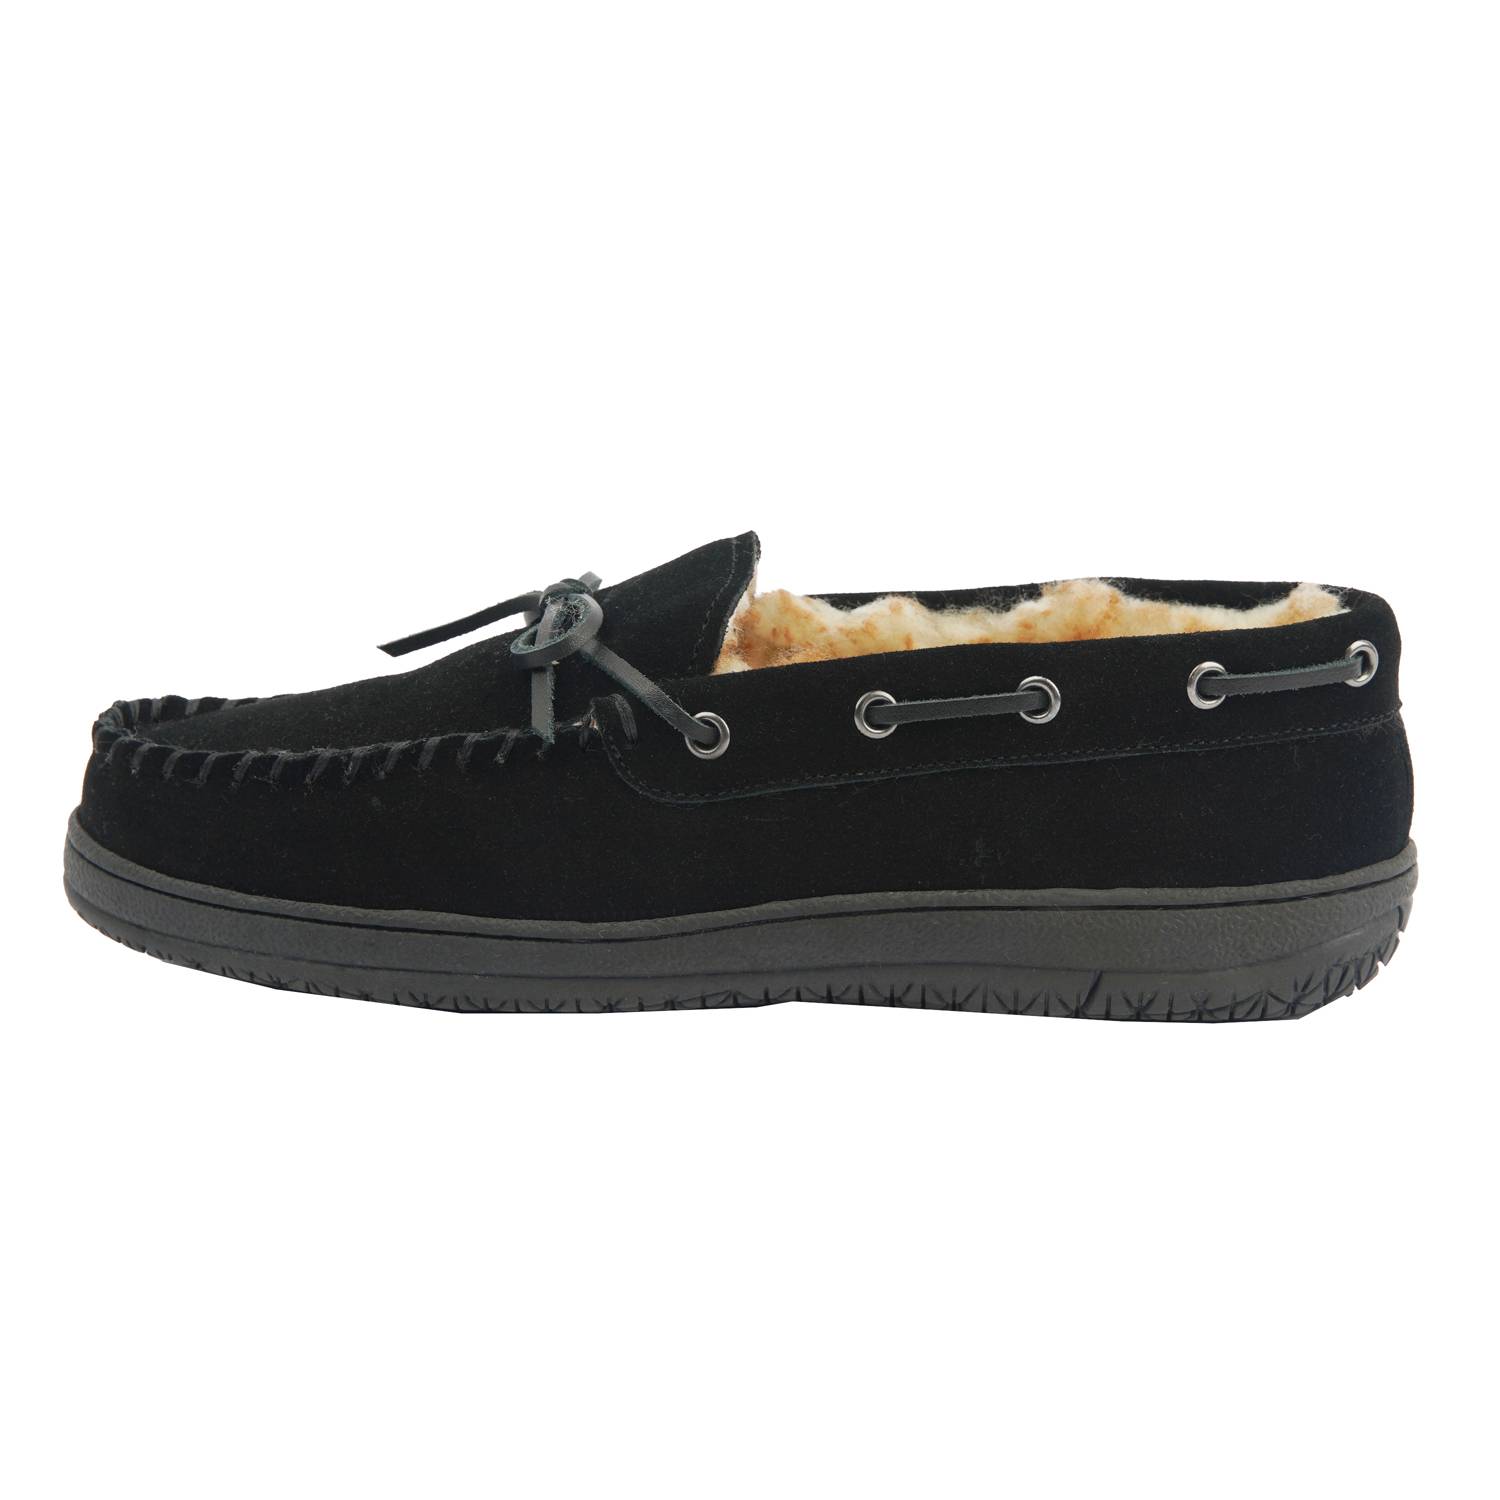 China High Quality Girl Moccasins Shoes - Men’s Leather Lace-Up ...